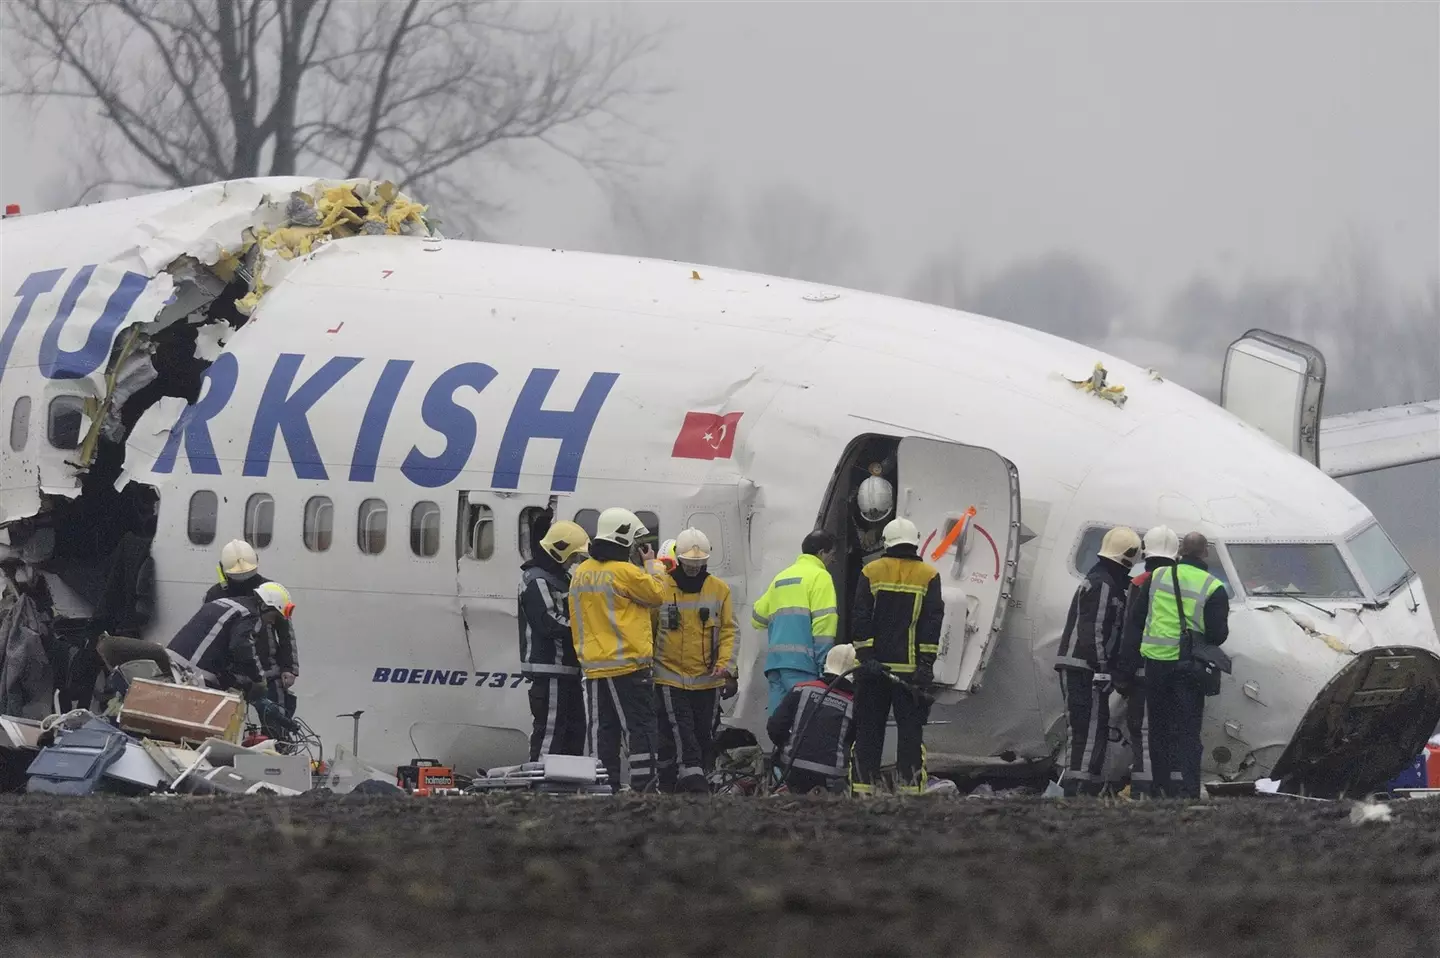 Also among the pictures sent to passengers were images of Turkish Airlines Flight 195, which crashed in 2009.